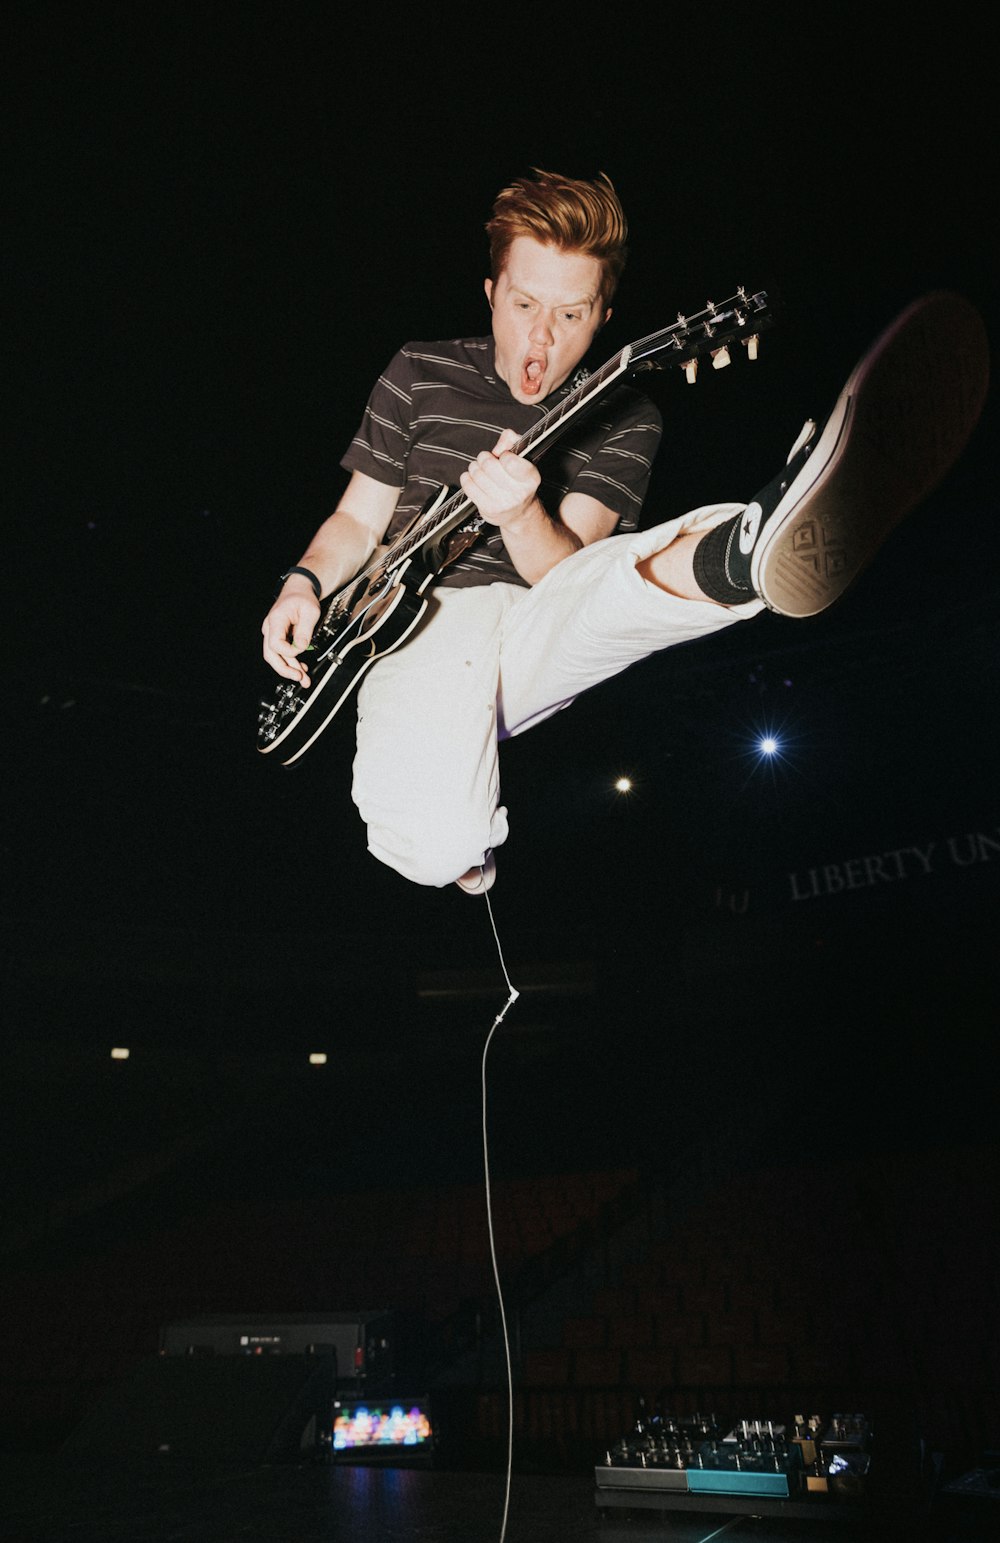 a man jumping in the air with a guitar